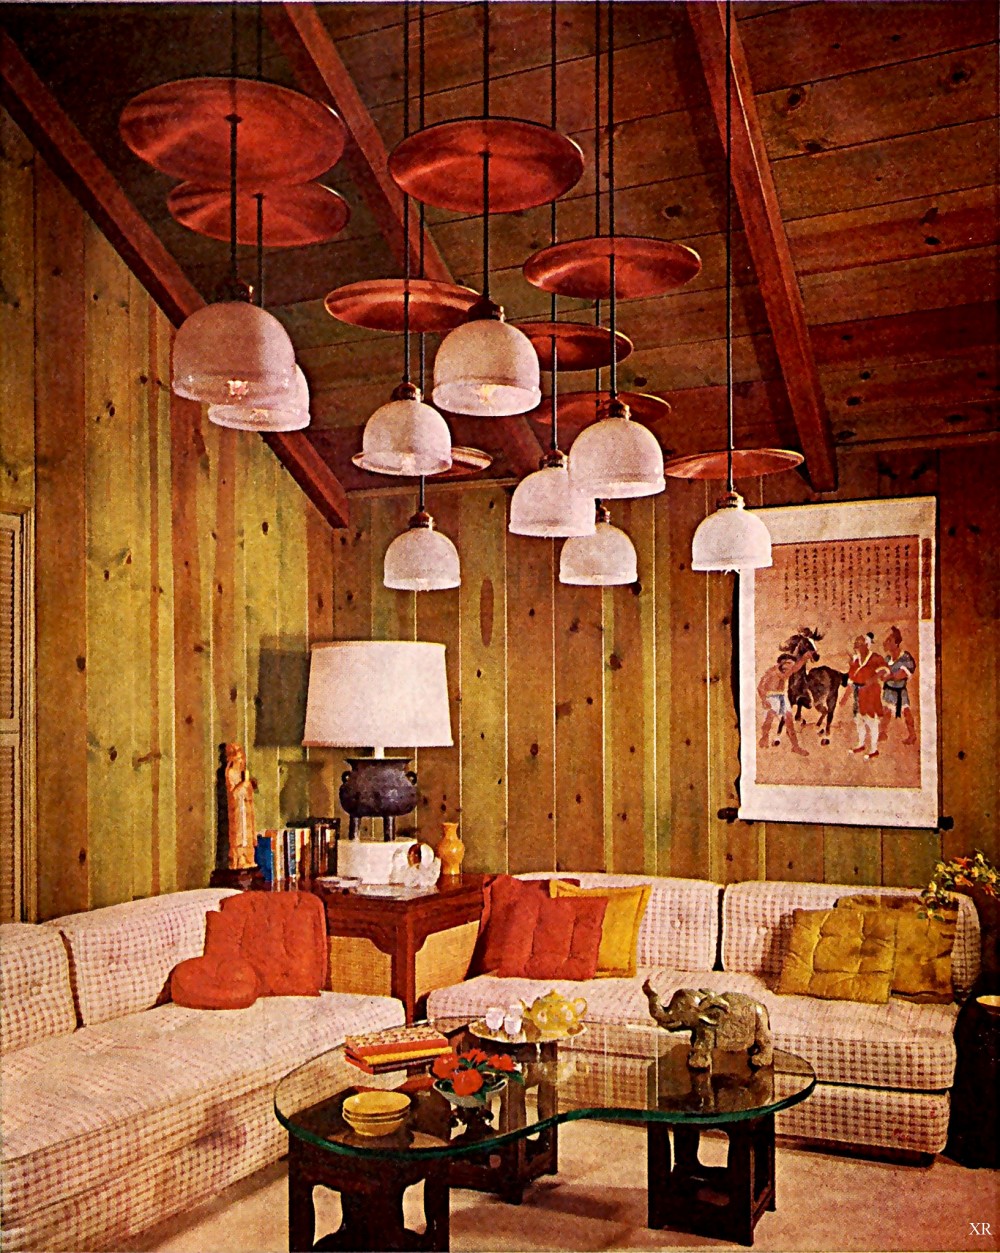 Interior: Home Decor of the 1960s - Ultra Swank